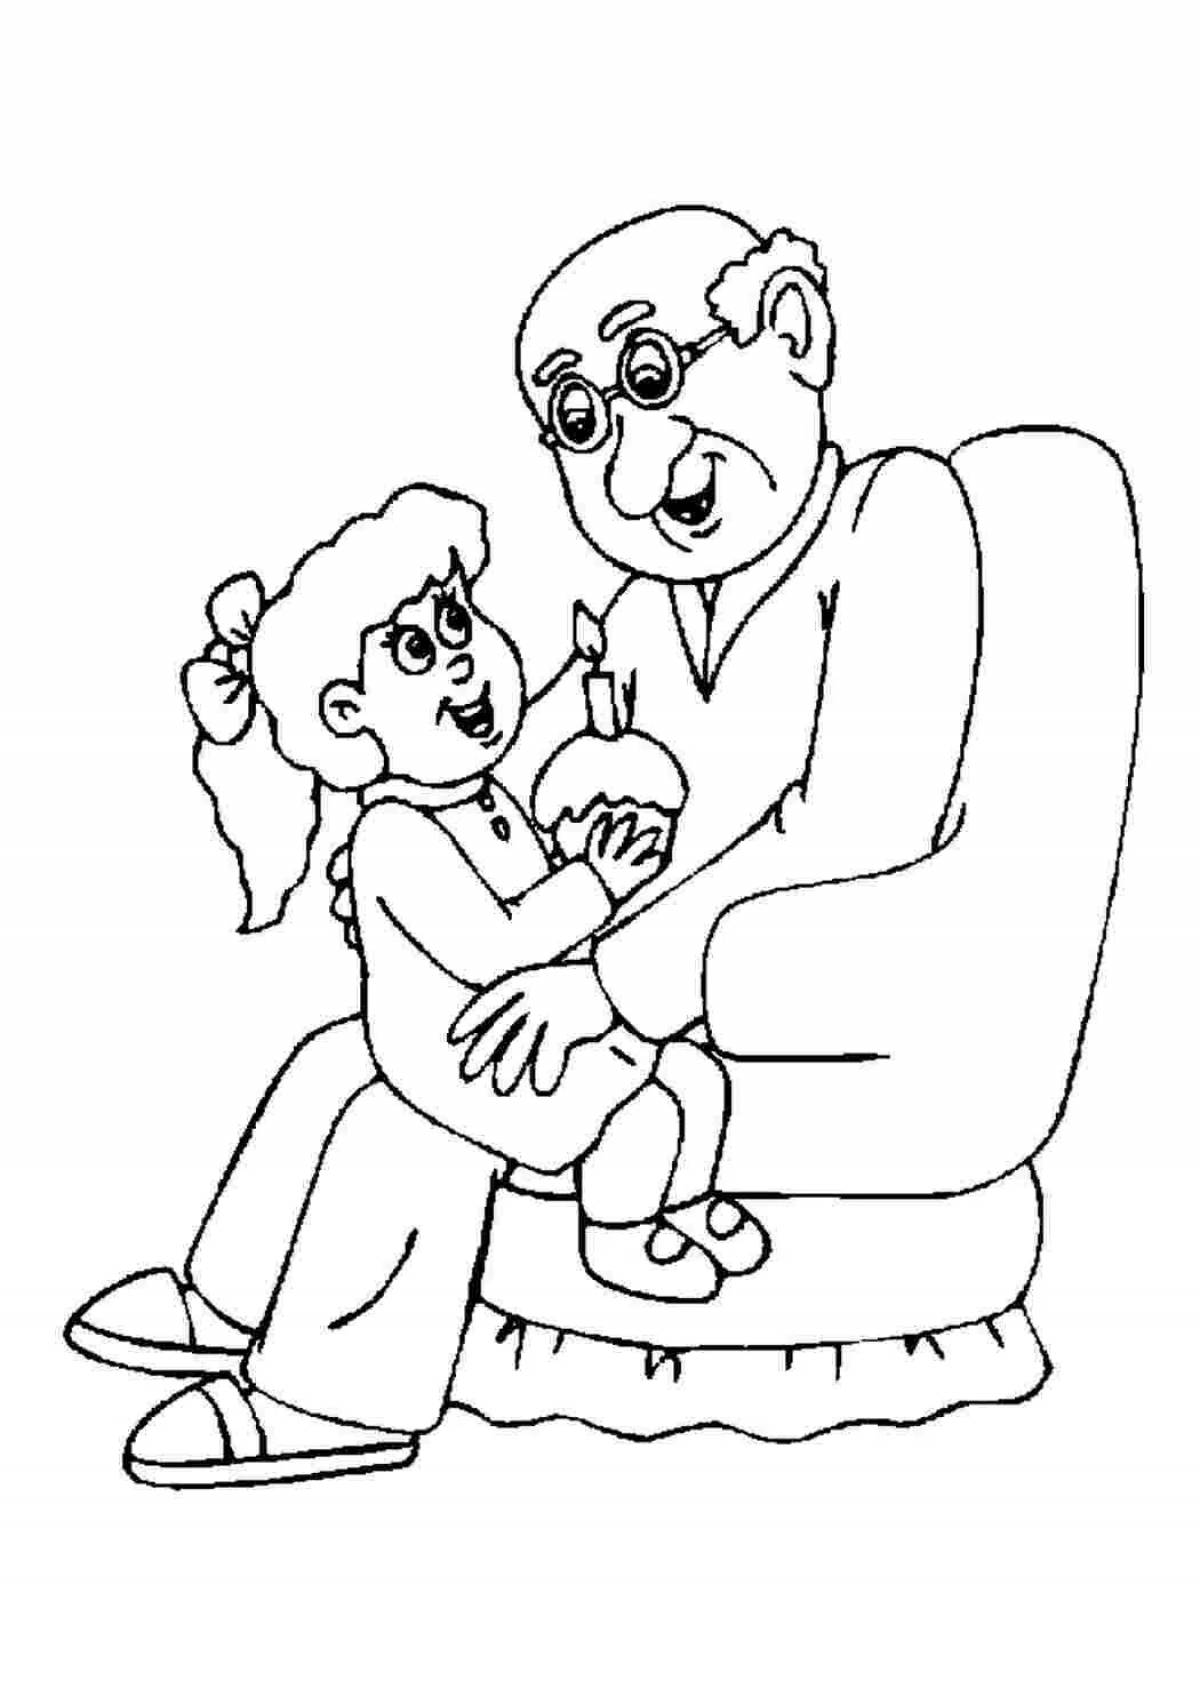 Loving grandfather and granddaughter coloring book